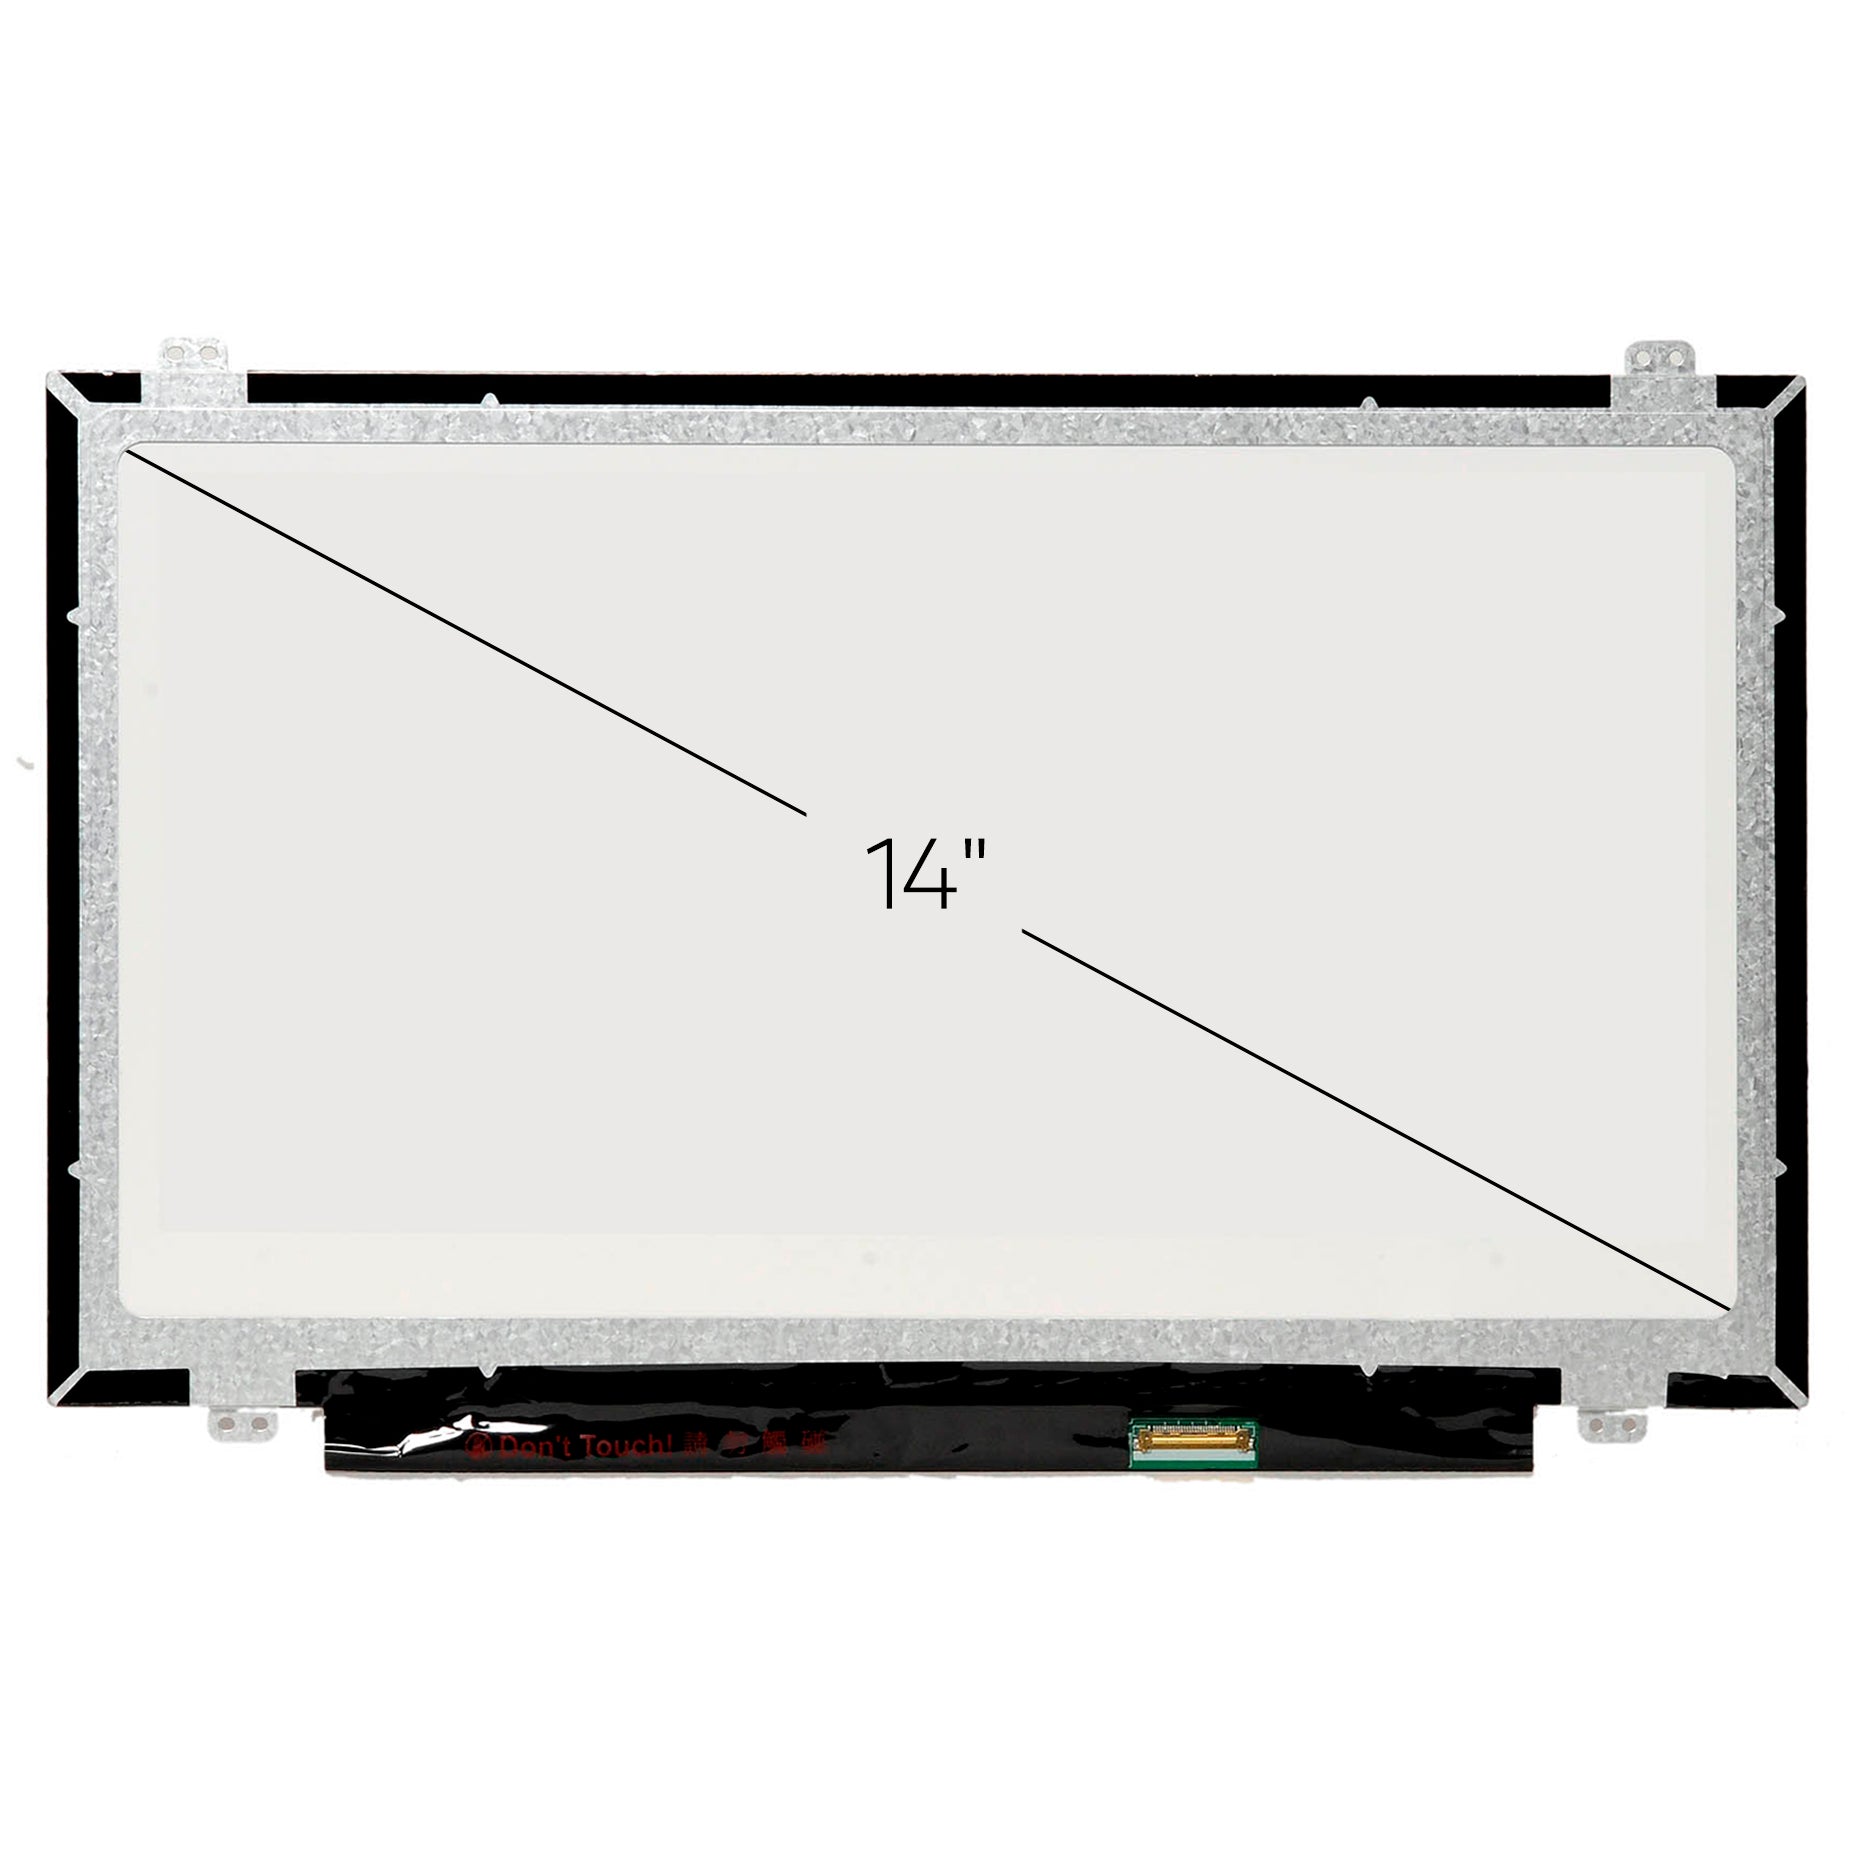 Screen Replacement for Acer Aspire One Cloudbook A01-431-C8G8 HD 1366x768 Glossy LCD LED Display